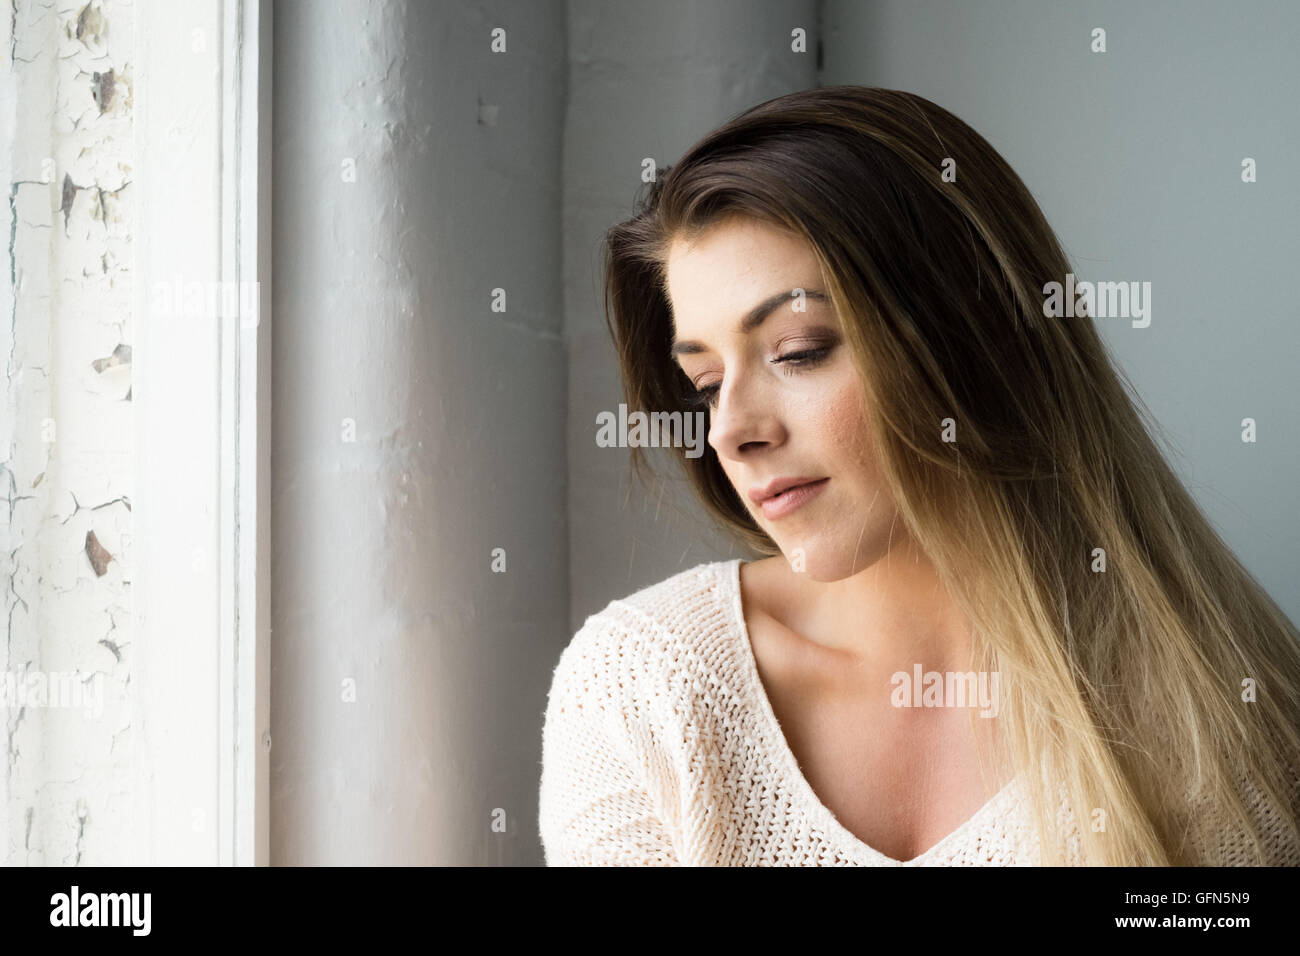 Beautiful young woman with enigmatic smile Stock Photo